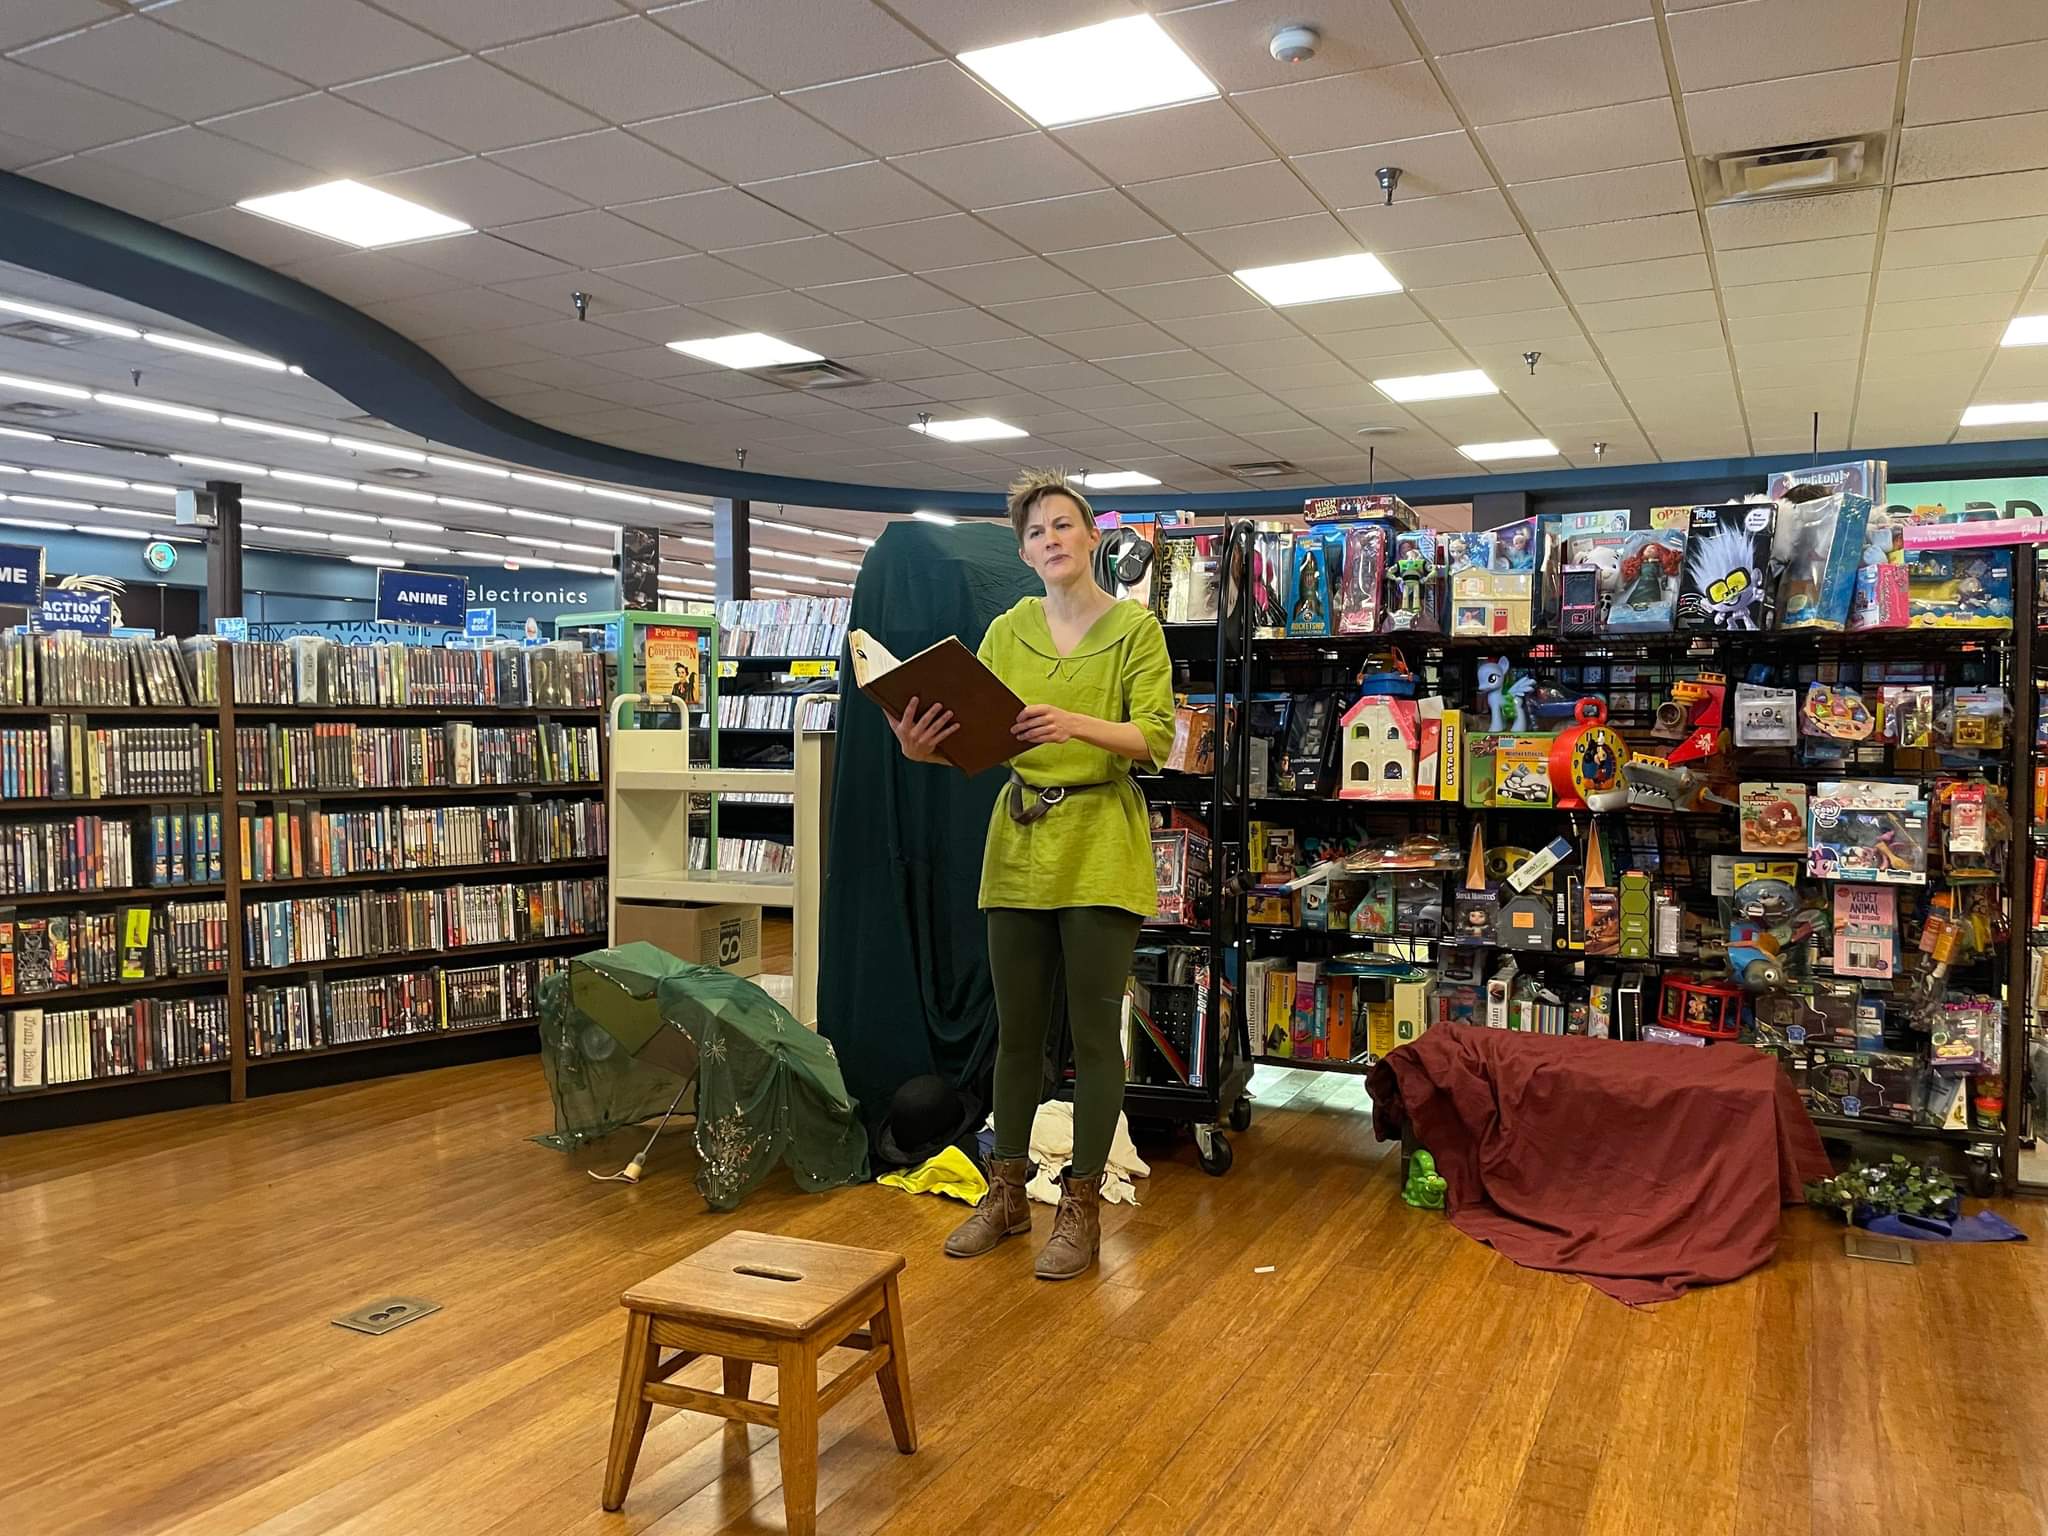 person dressed as Peter Pan in front of bookshelves